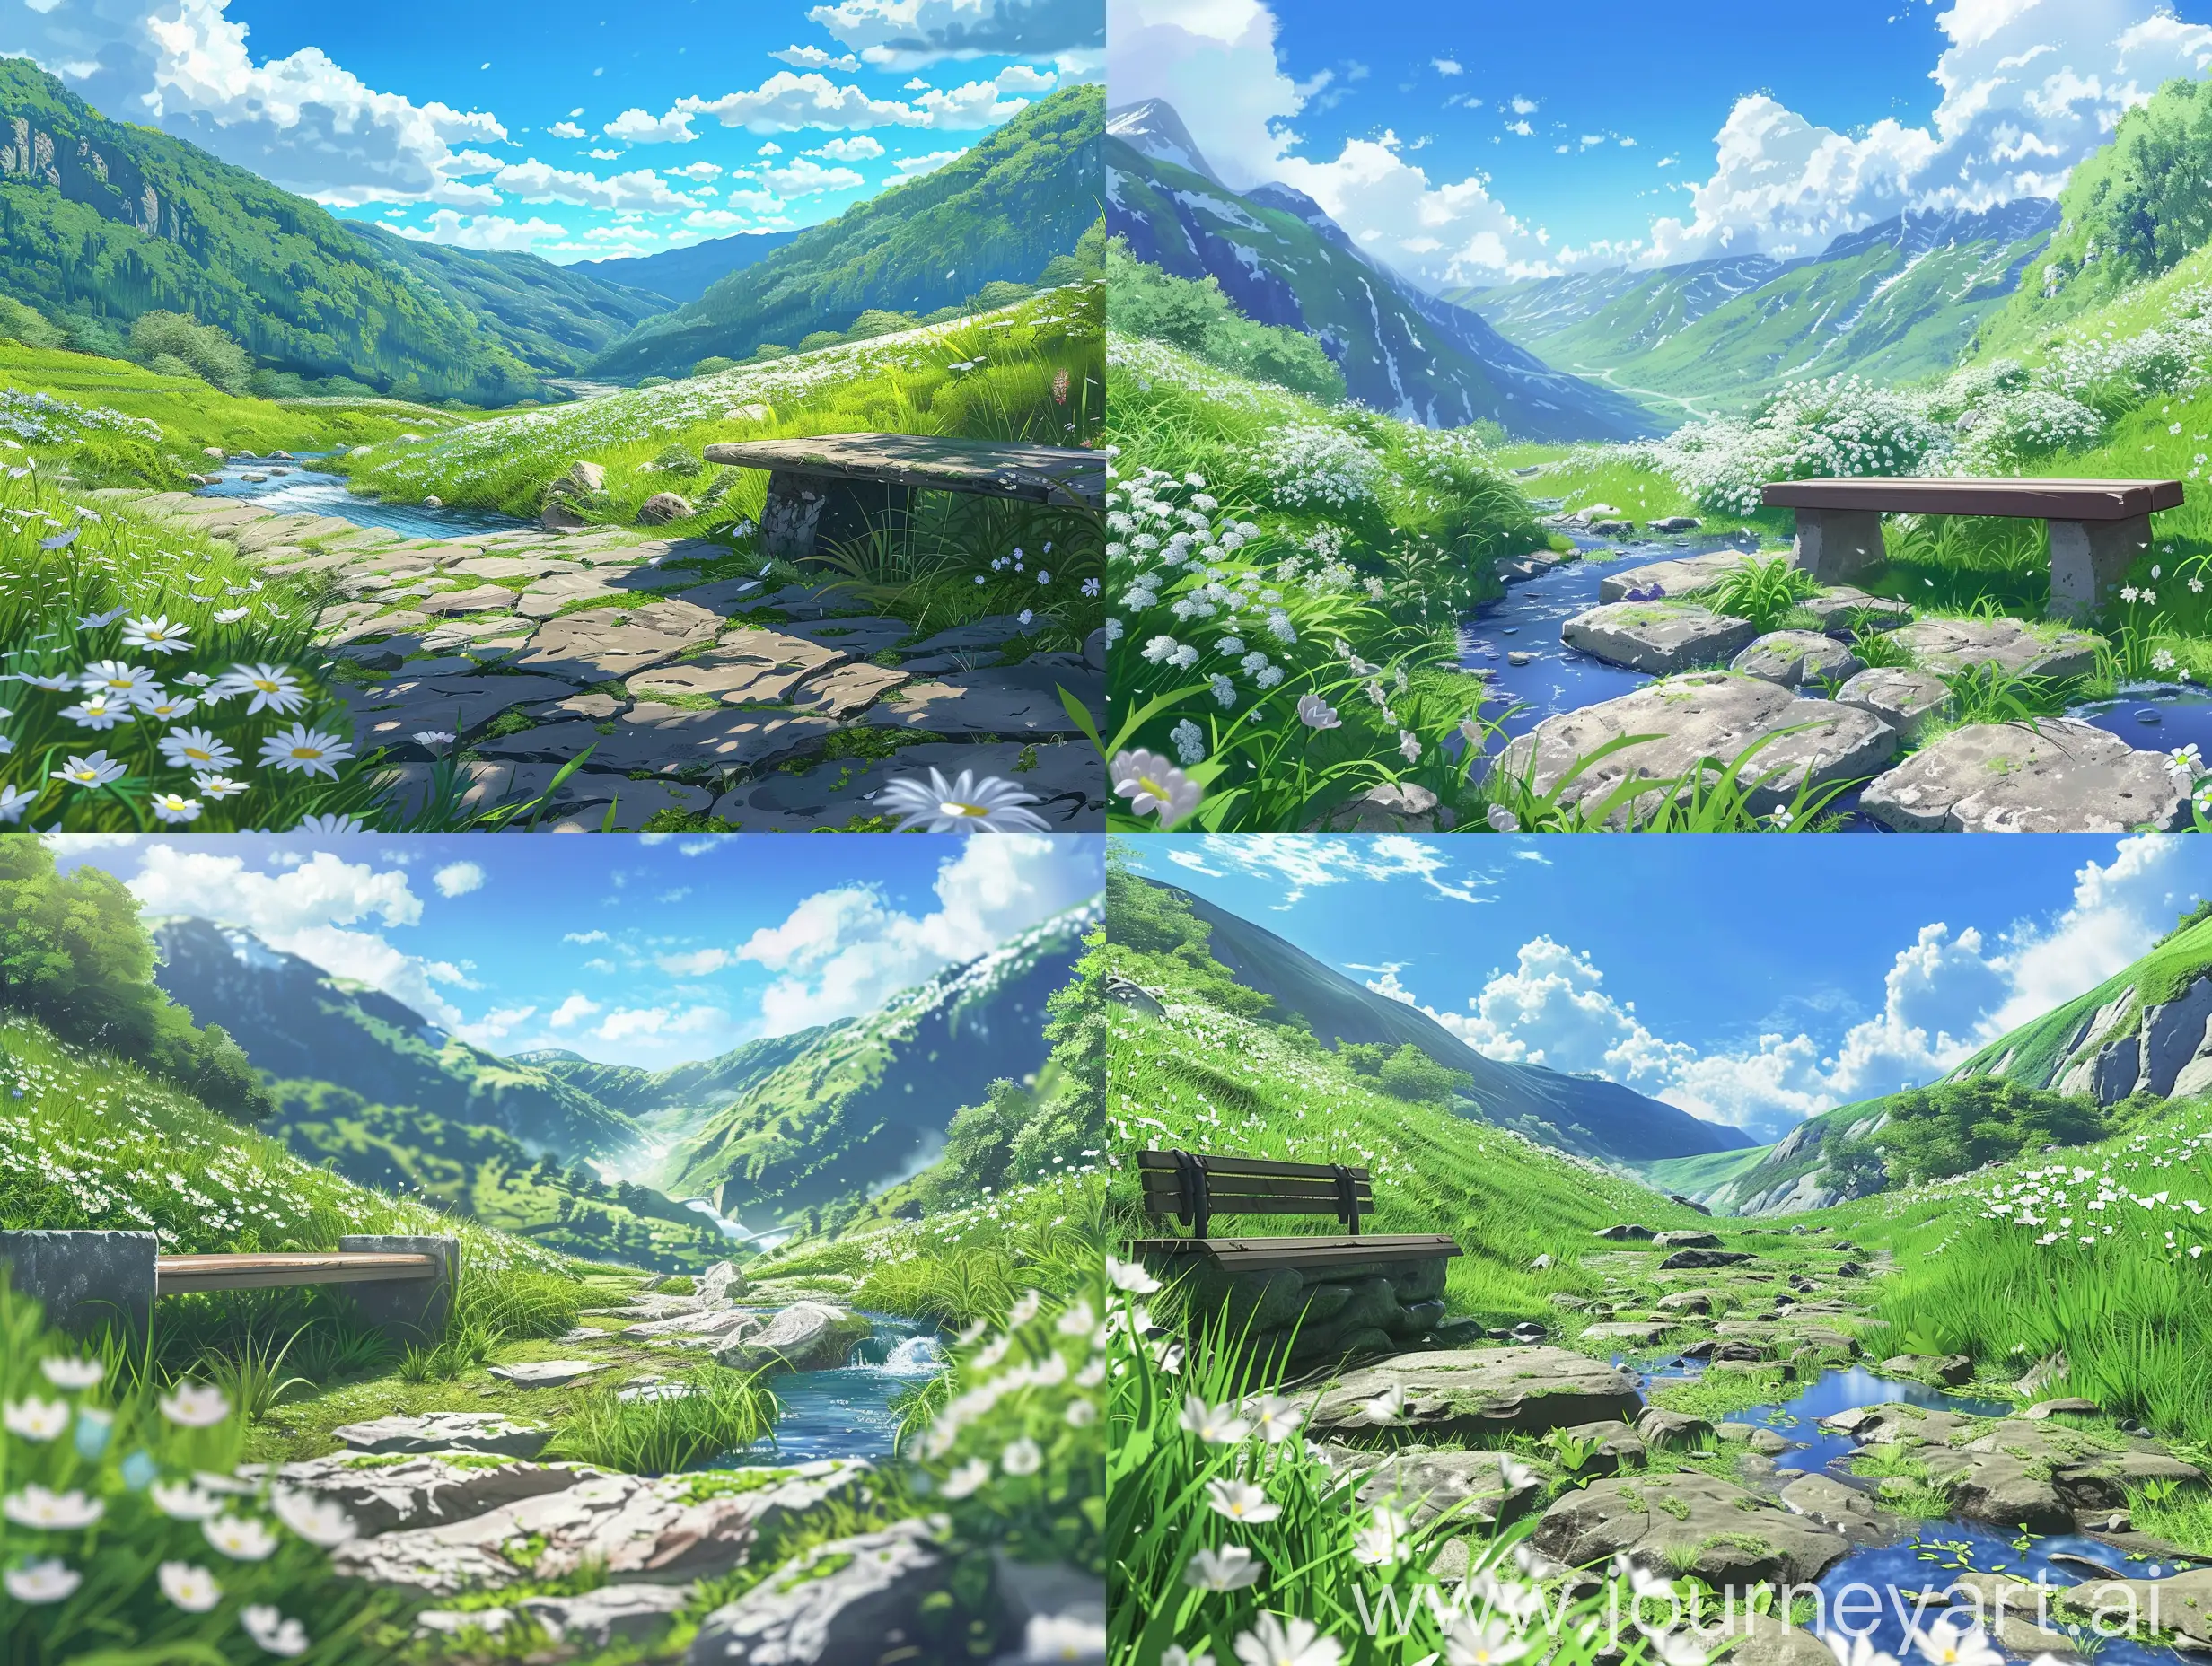 Tranquil-Valley-Stream-and-Nature-Scenery-Mokoto-Shinkai-and-Ghibli-Mix-Inspired-Anime-Landscape